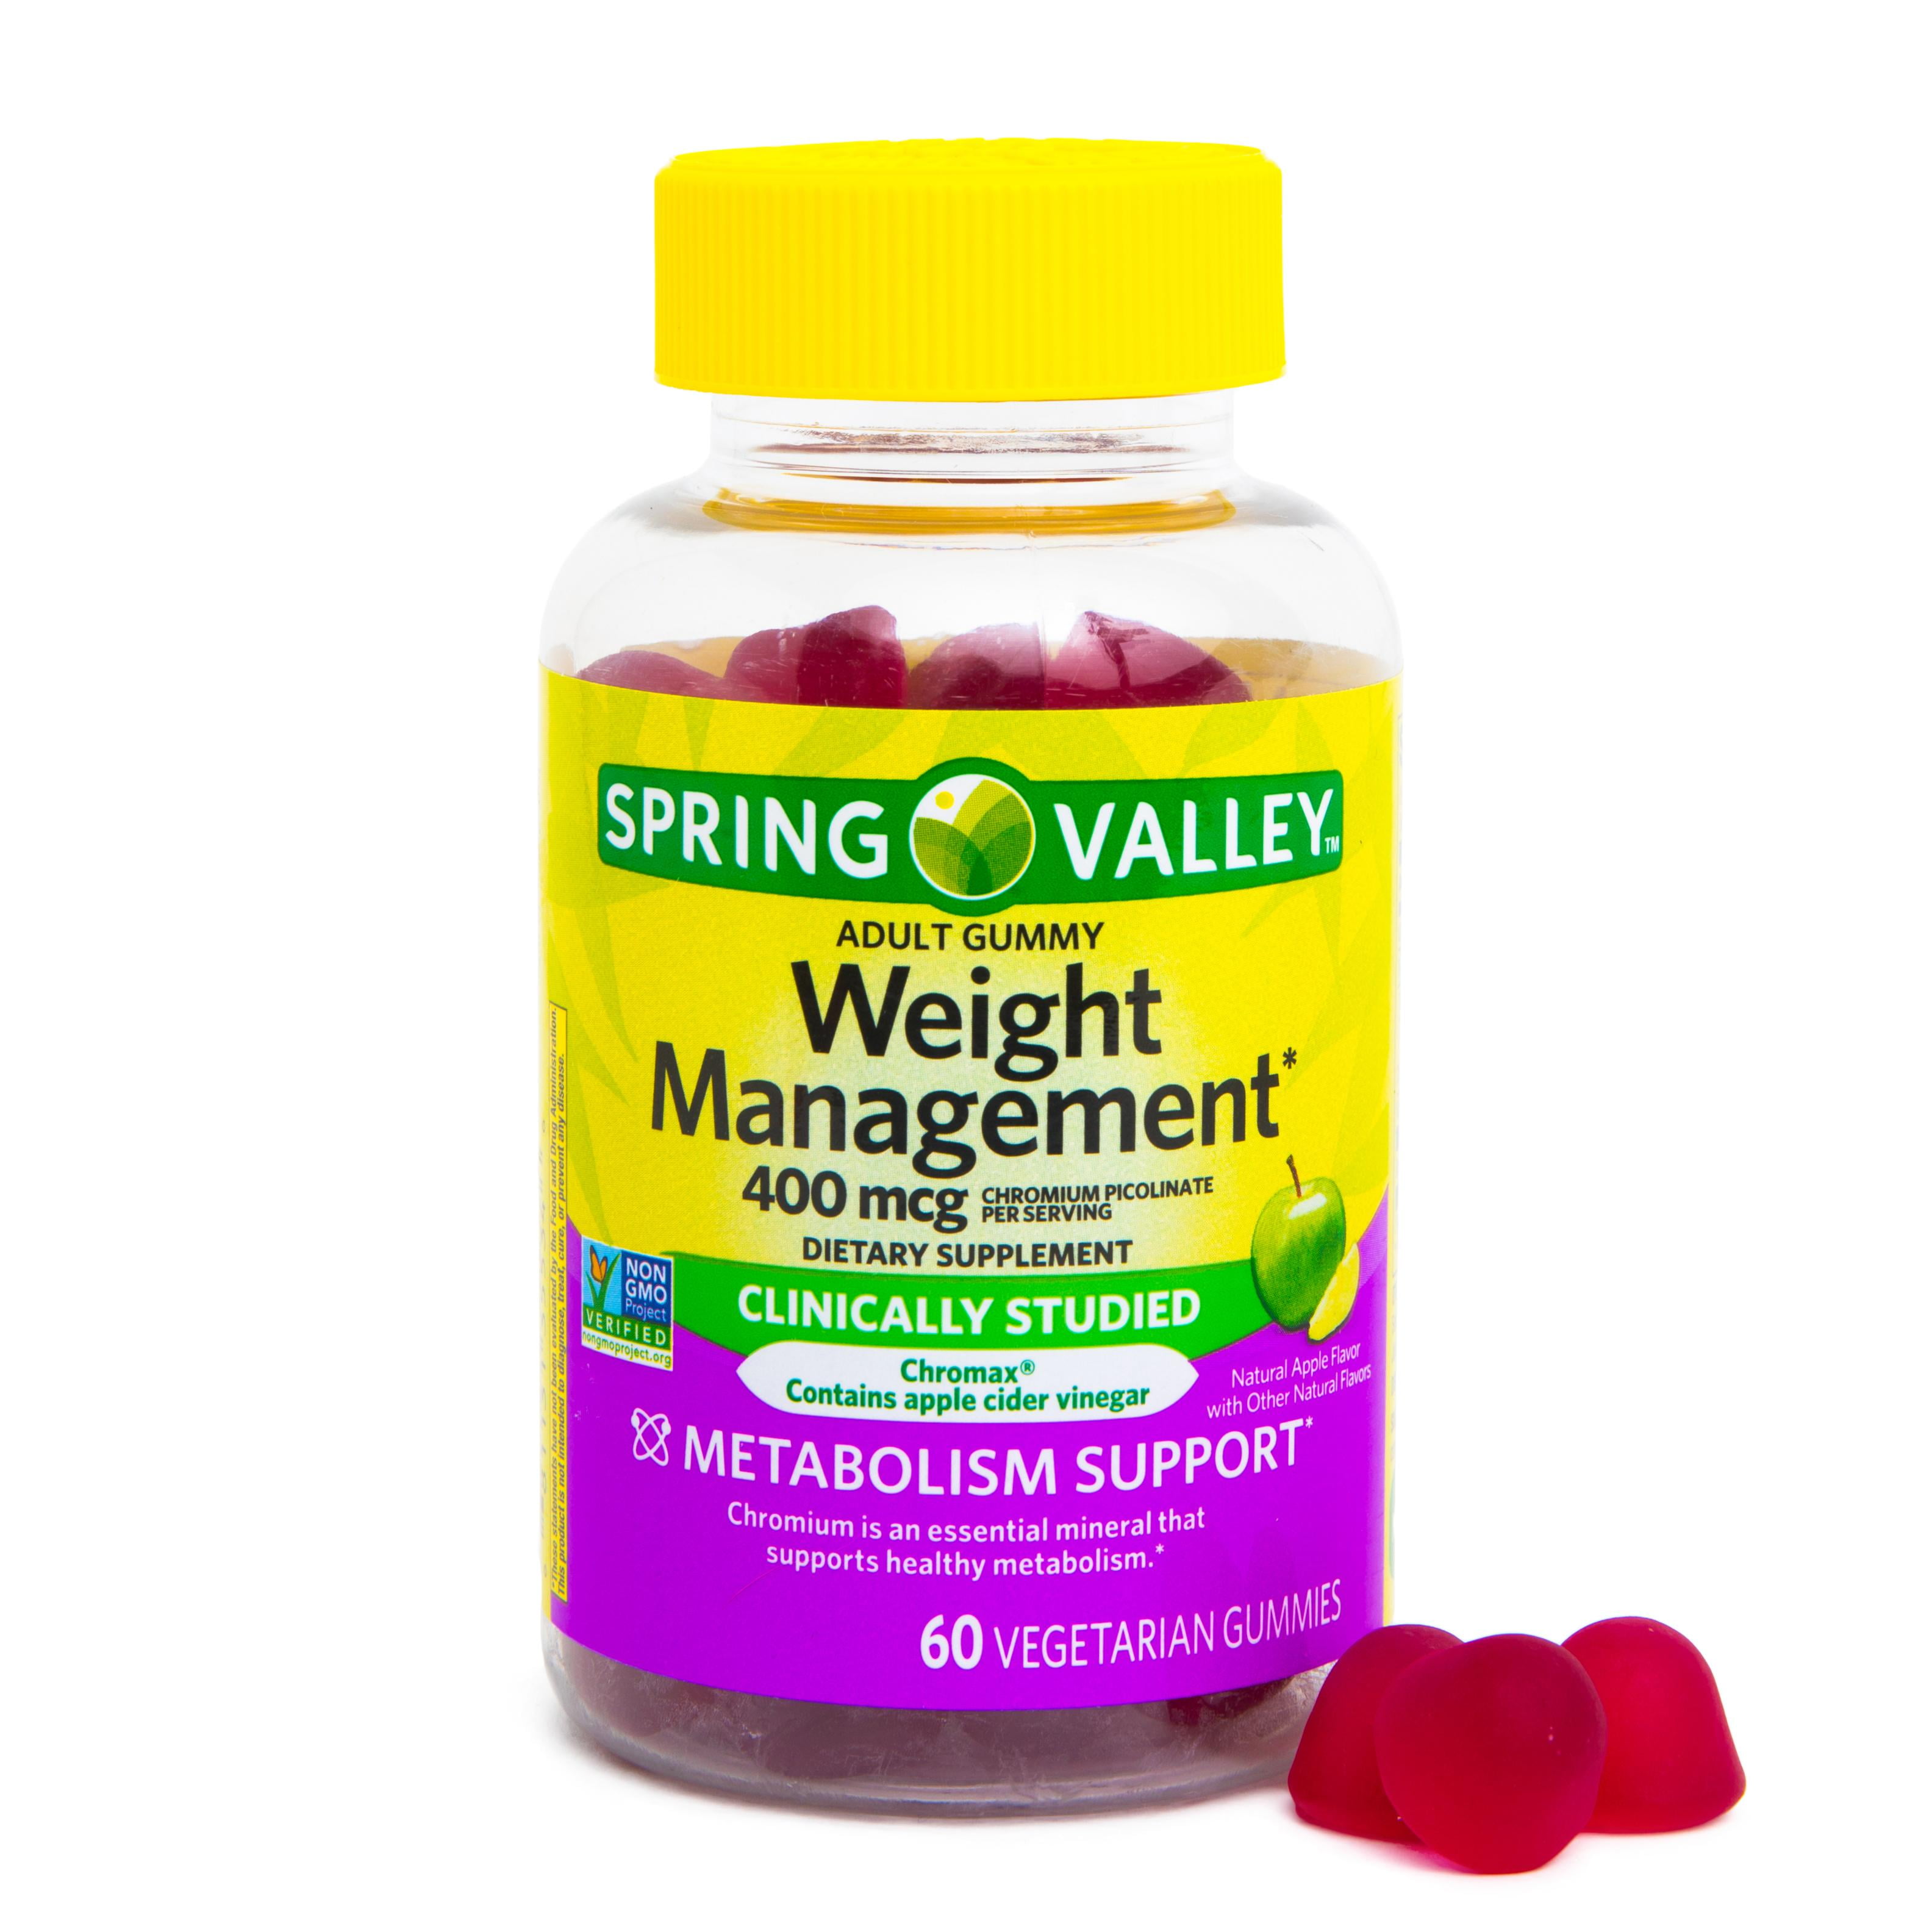 Weight management products